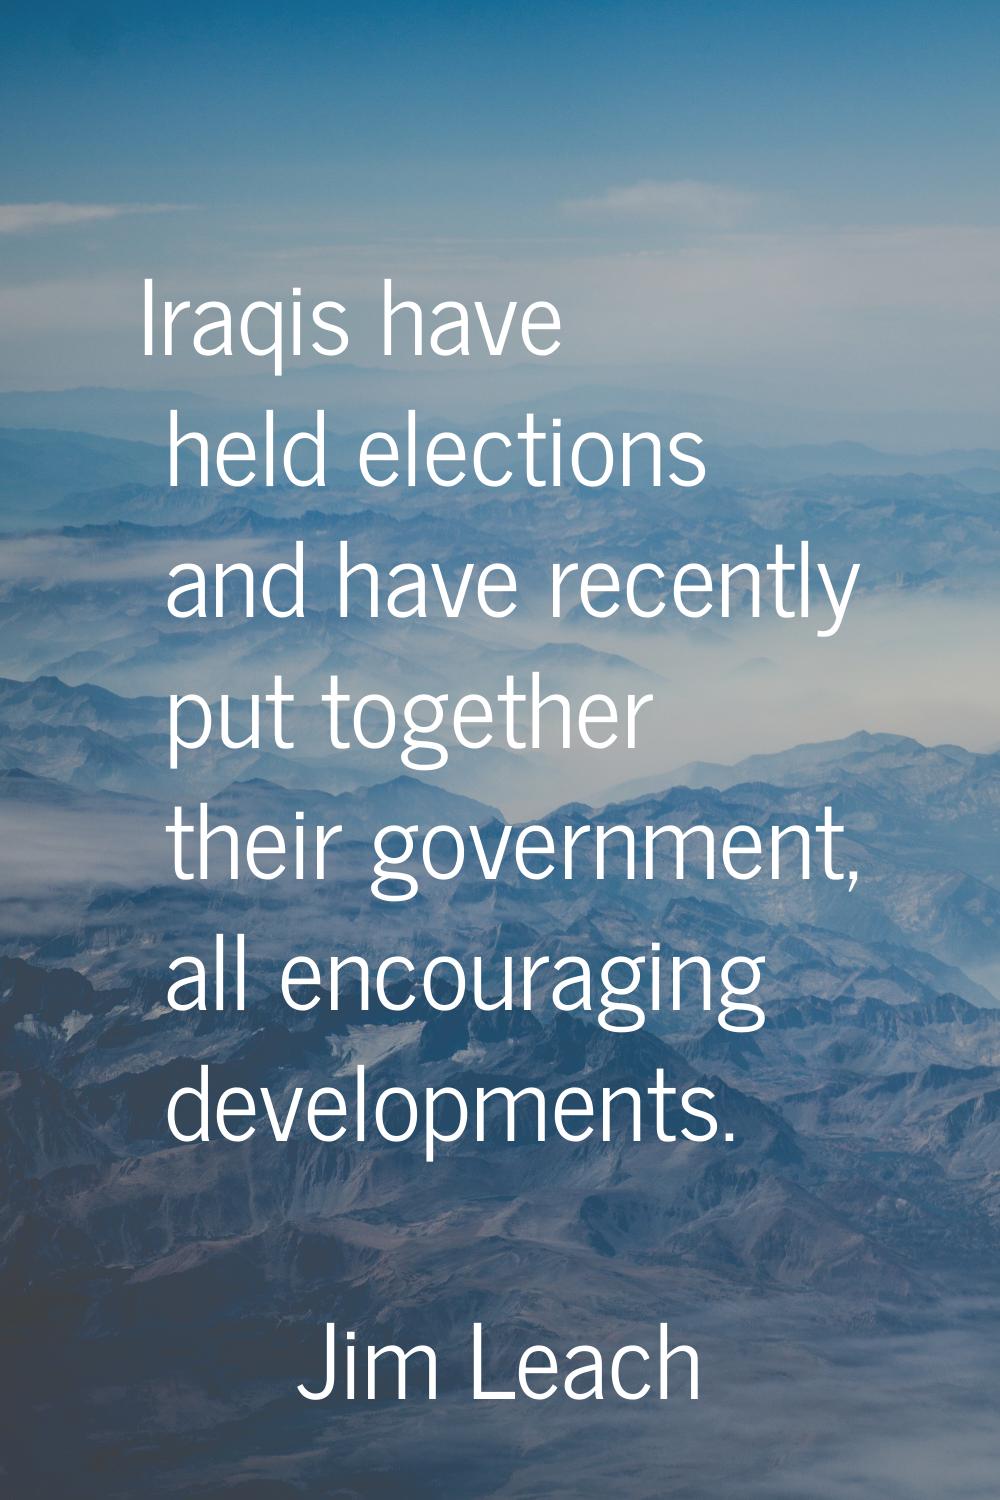 Iraqis have held elections and have recently put together their government, all encouraging develop